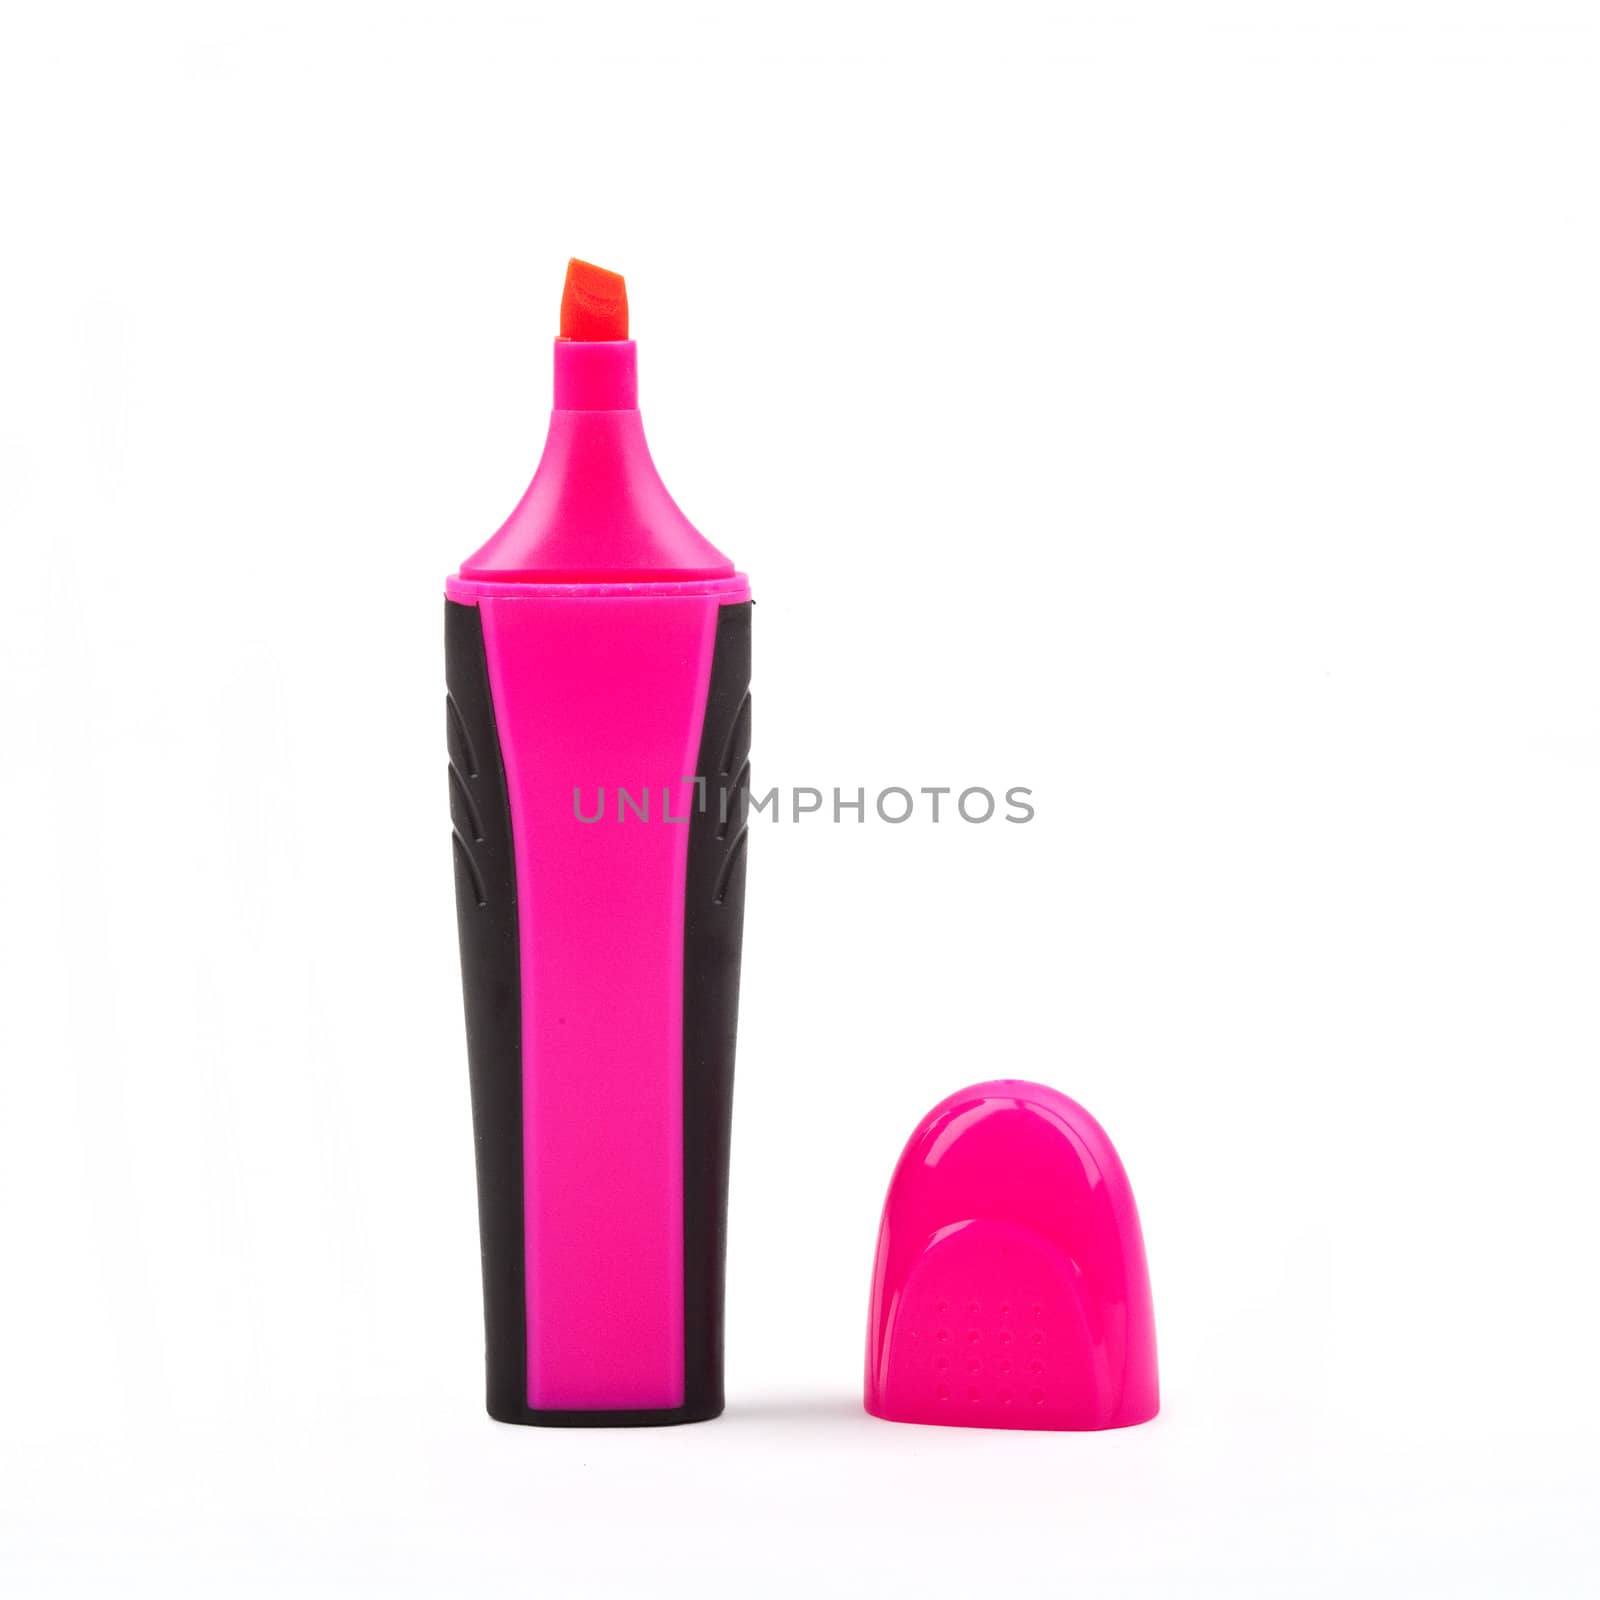 A pink Highlighter pen over a white background.